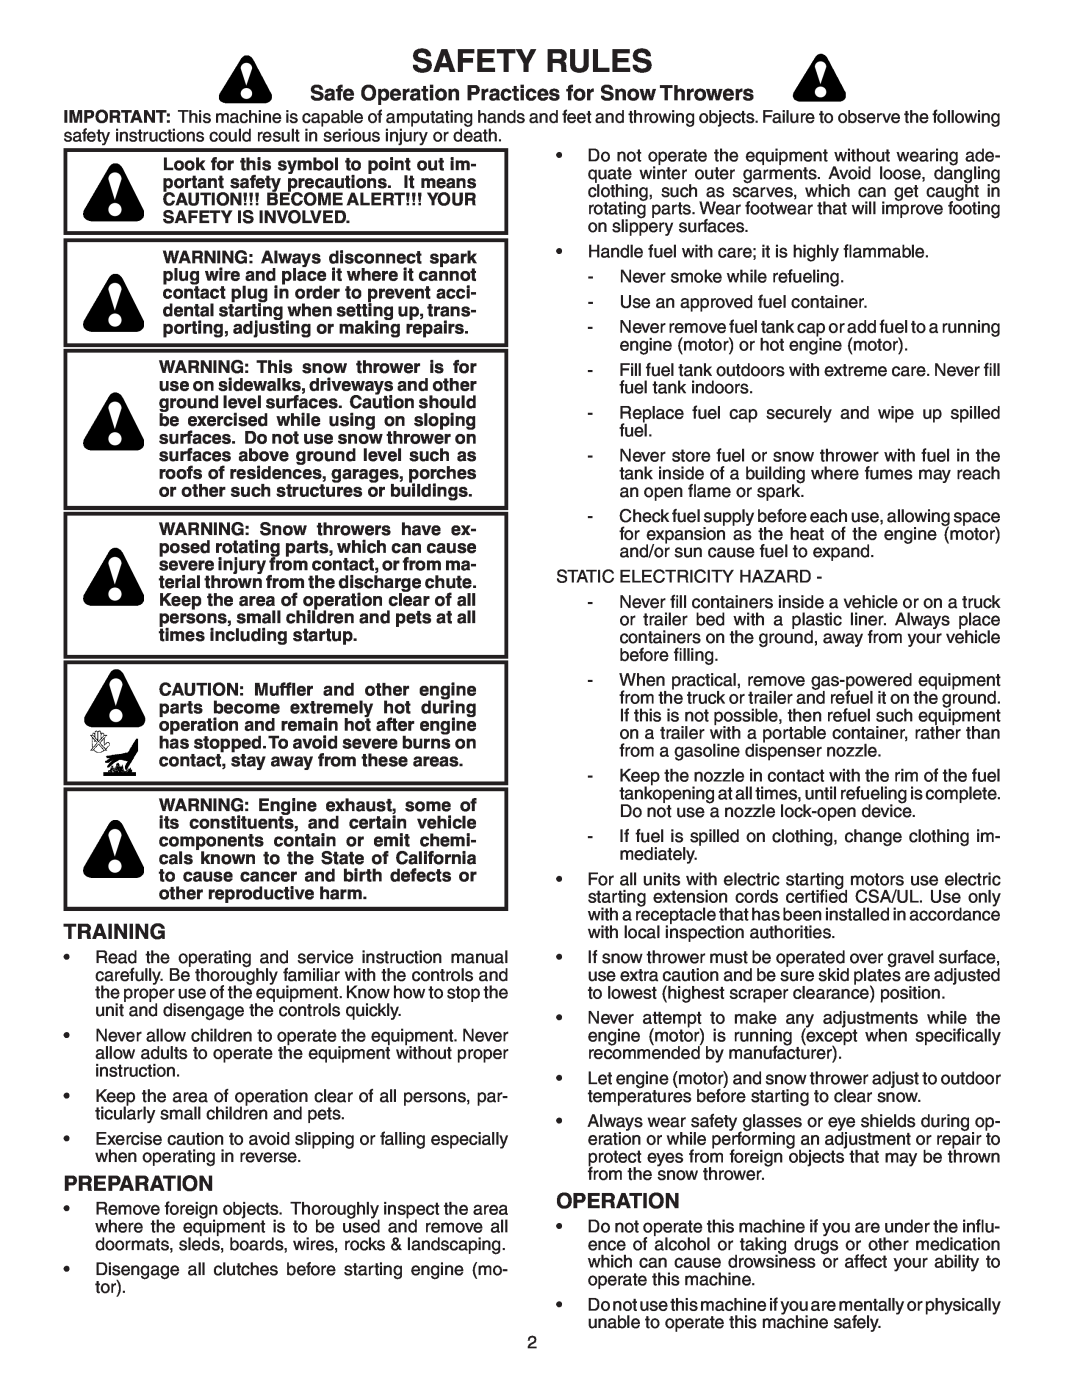 Poulan PP524A owner manual Safety Rules, Safe Operation Practices for Snow Throwers, Training, Preparation 